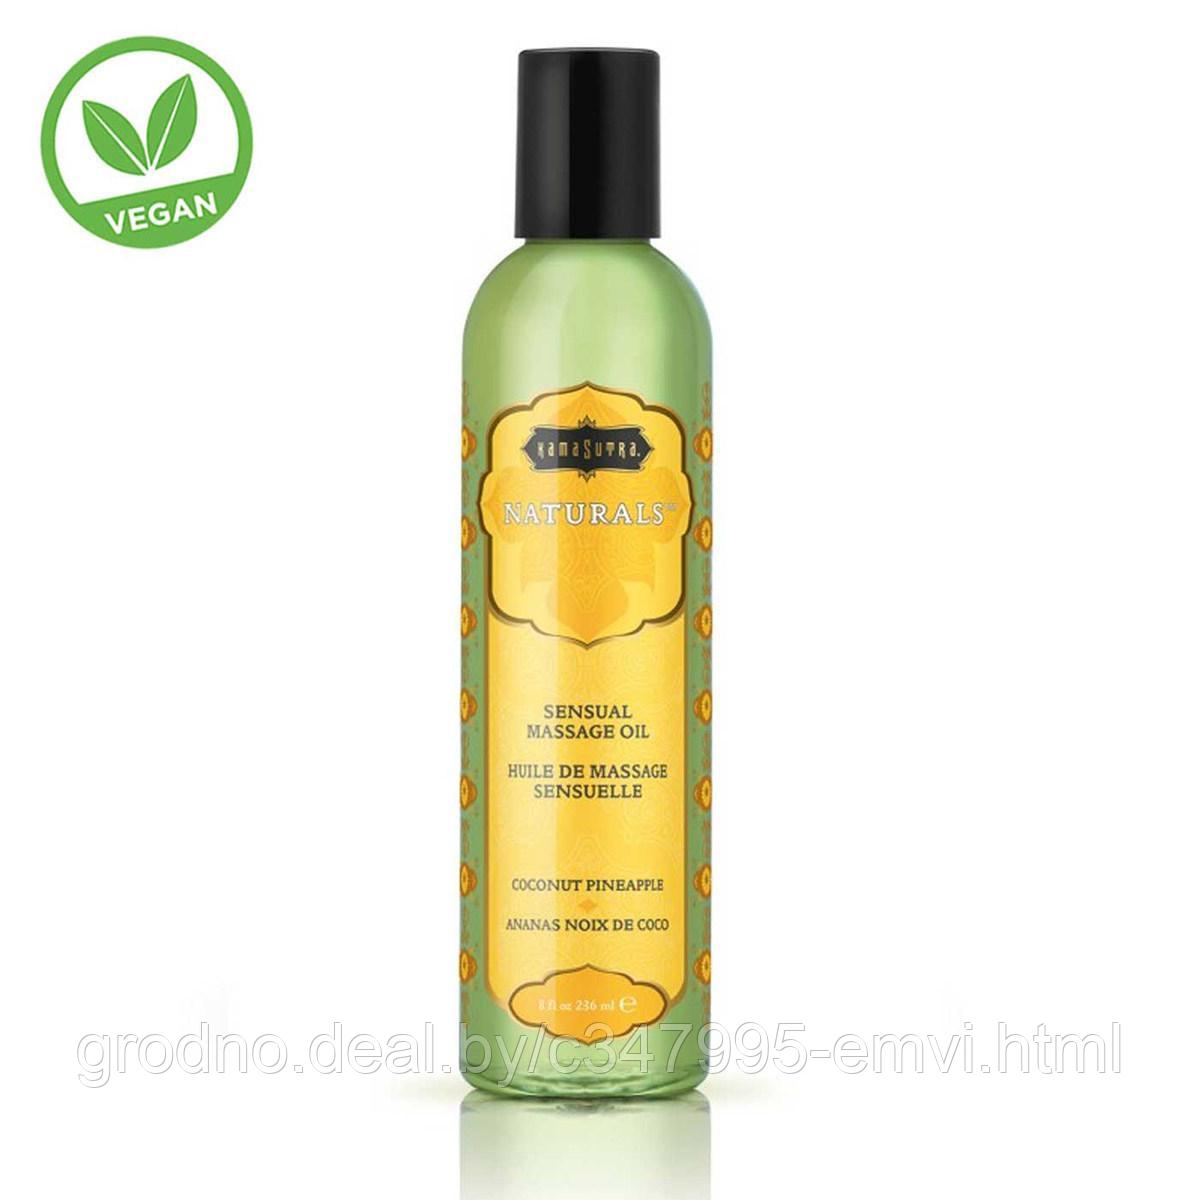 Массажное масло Naturals massage oil Coconut pineapple 236 мл - фото 1 - id-p225116652